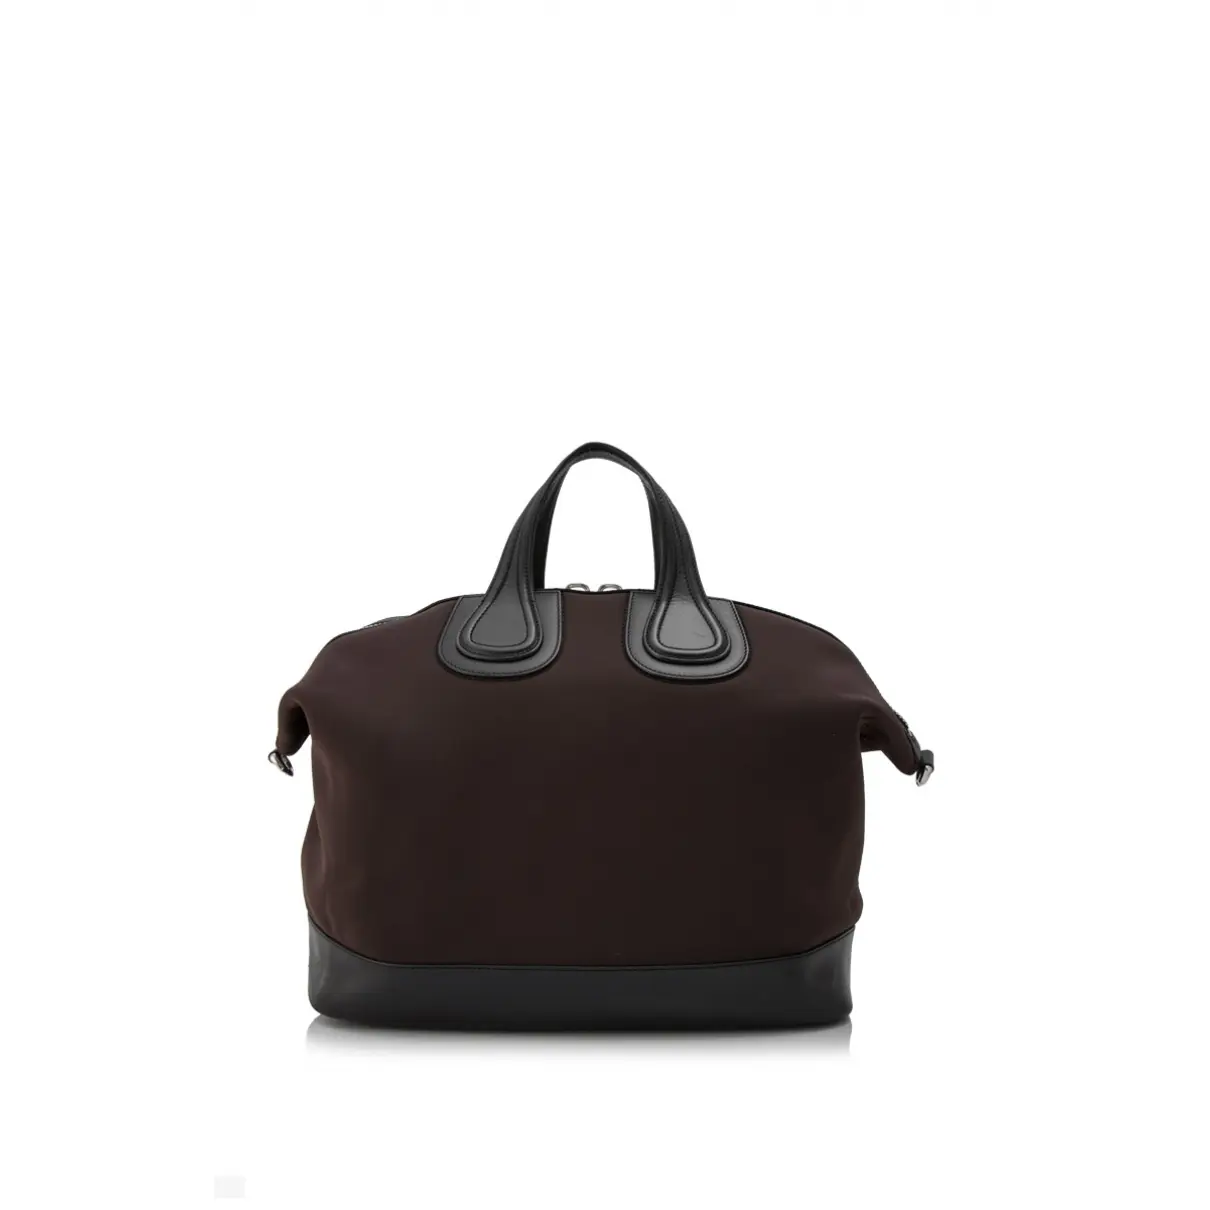 Buy Givenchy Cloth bag online